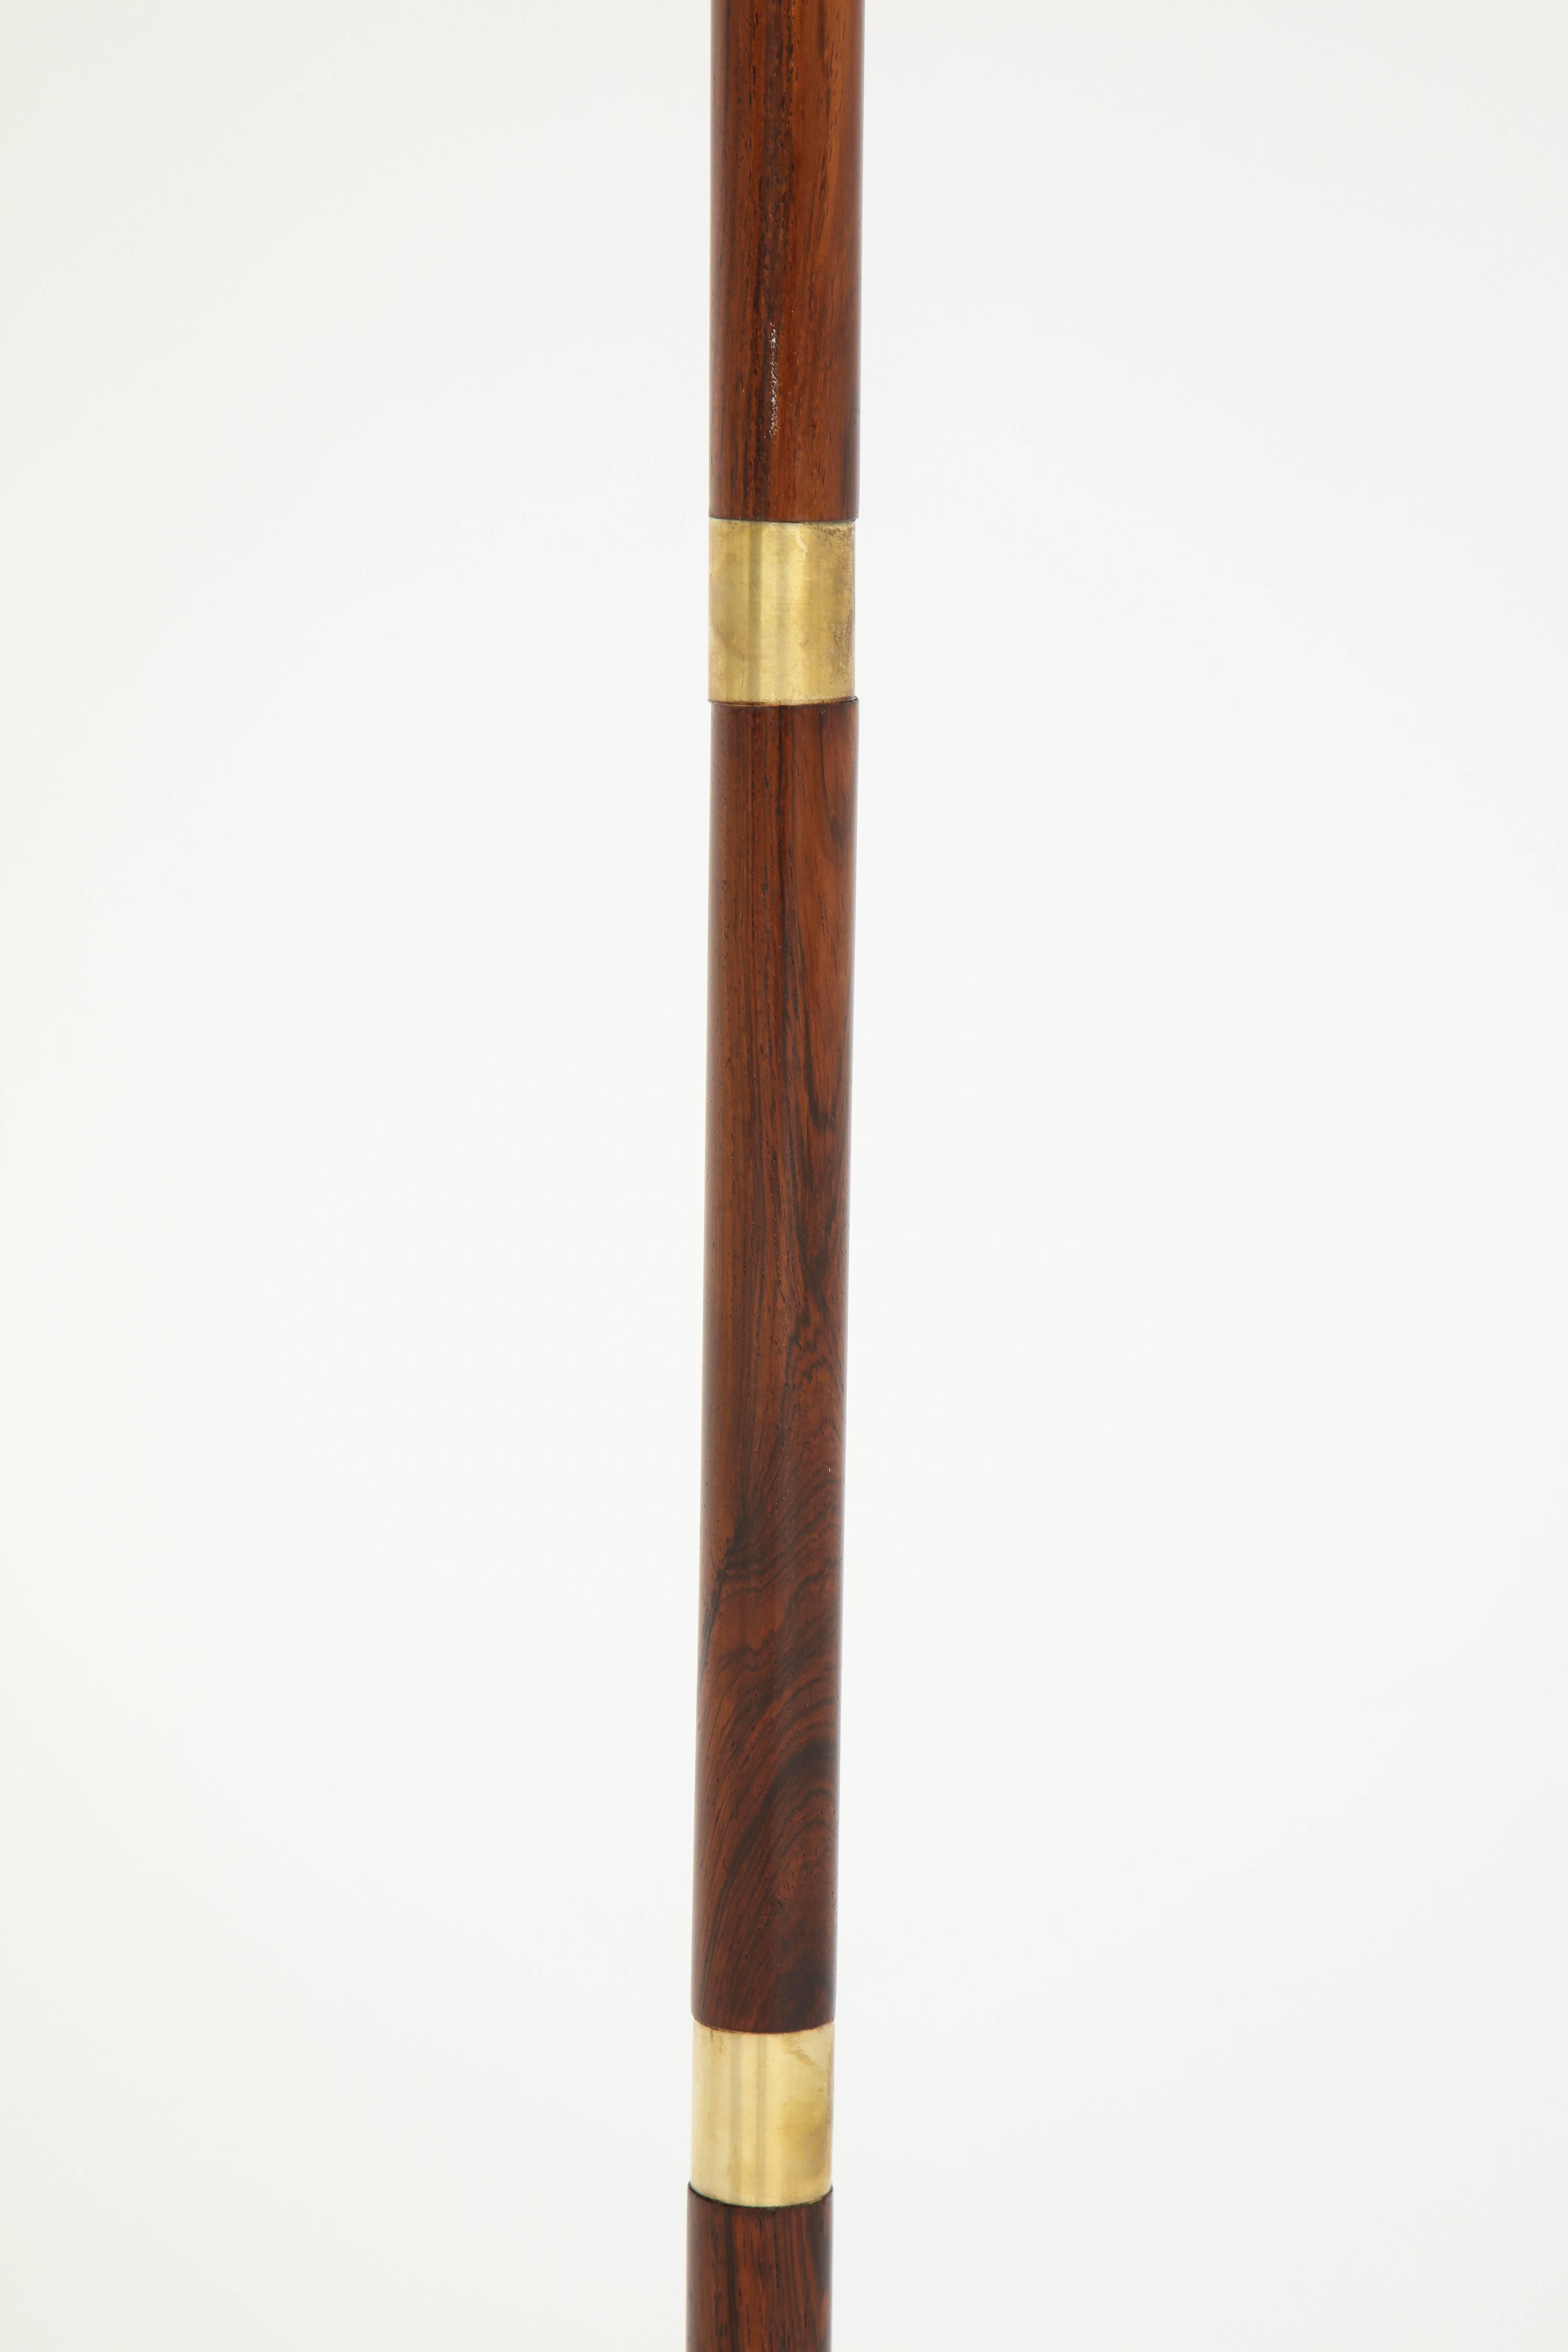 Mid-20th Century Danish Brass and Rosewood Floor Lamp by Fog & Mørup, circa 1950s